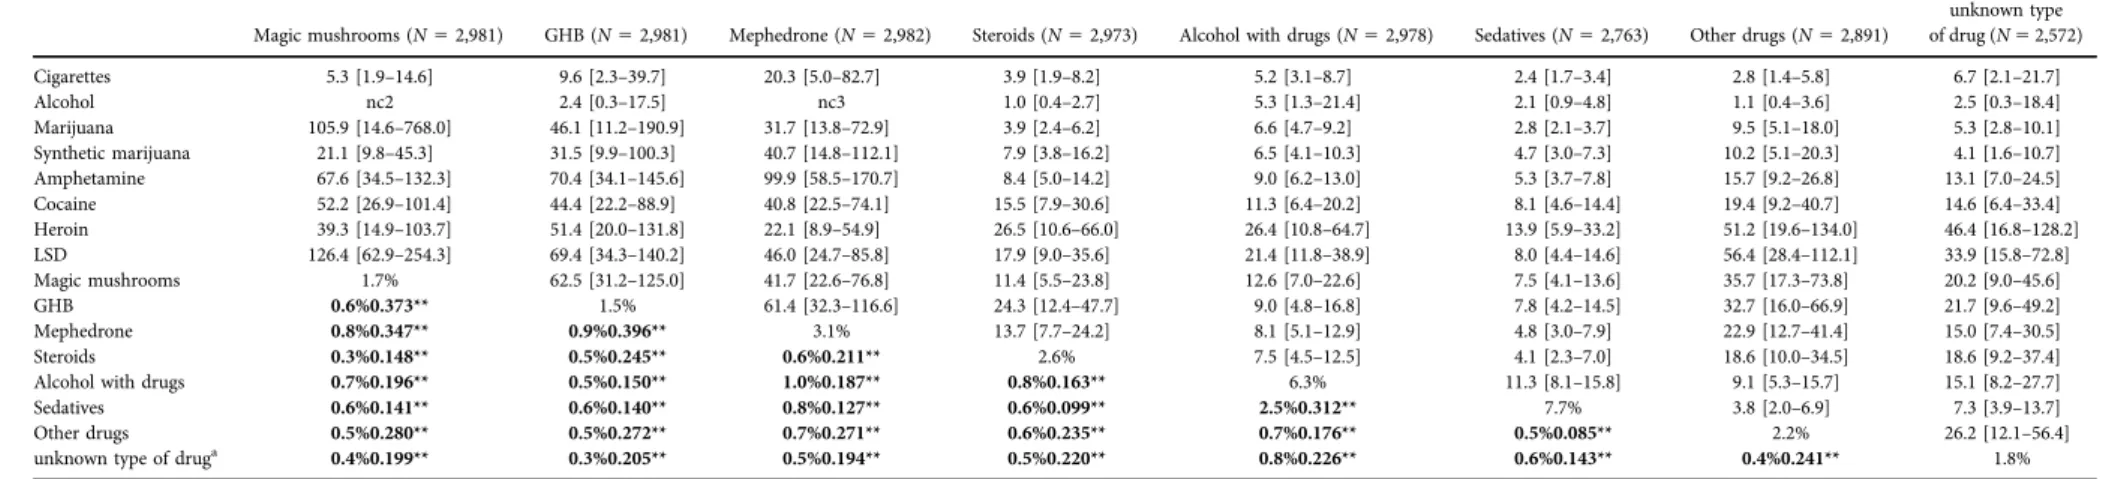 Table 1B. Lifetime occurrence and co-occurrence of psychoactive substance use